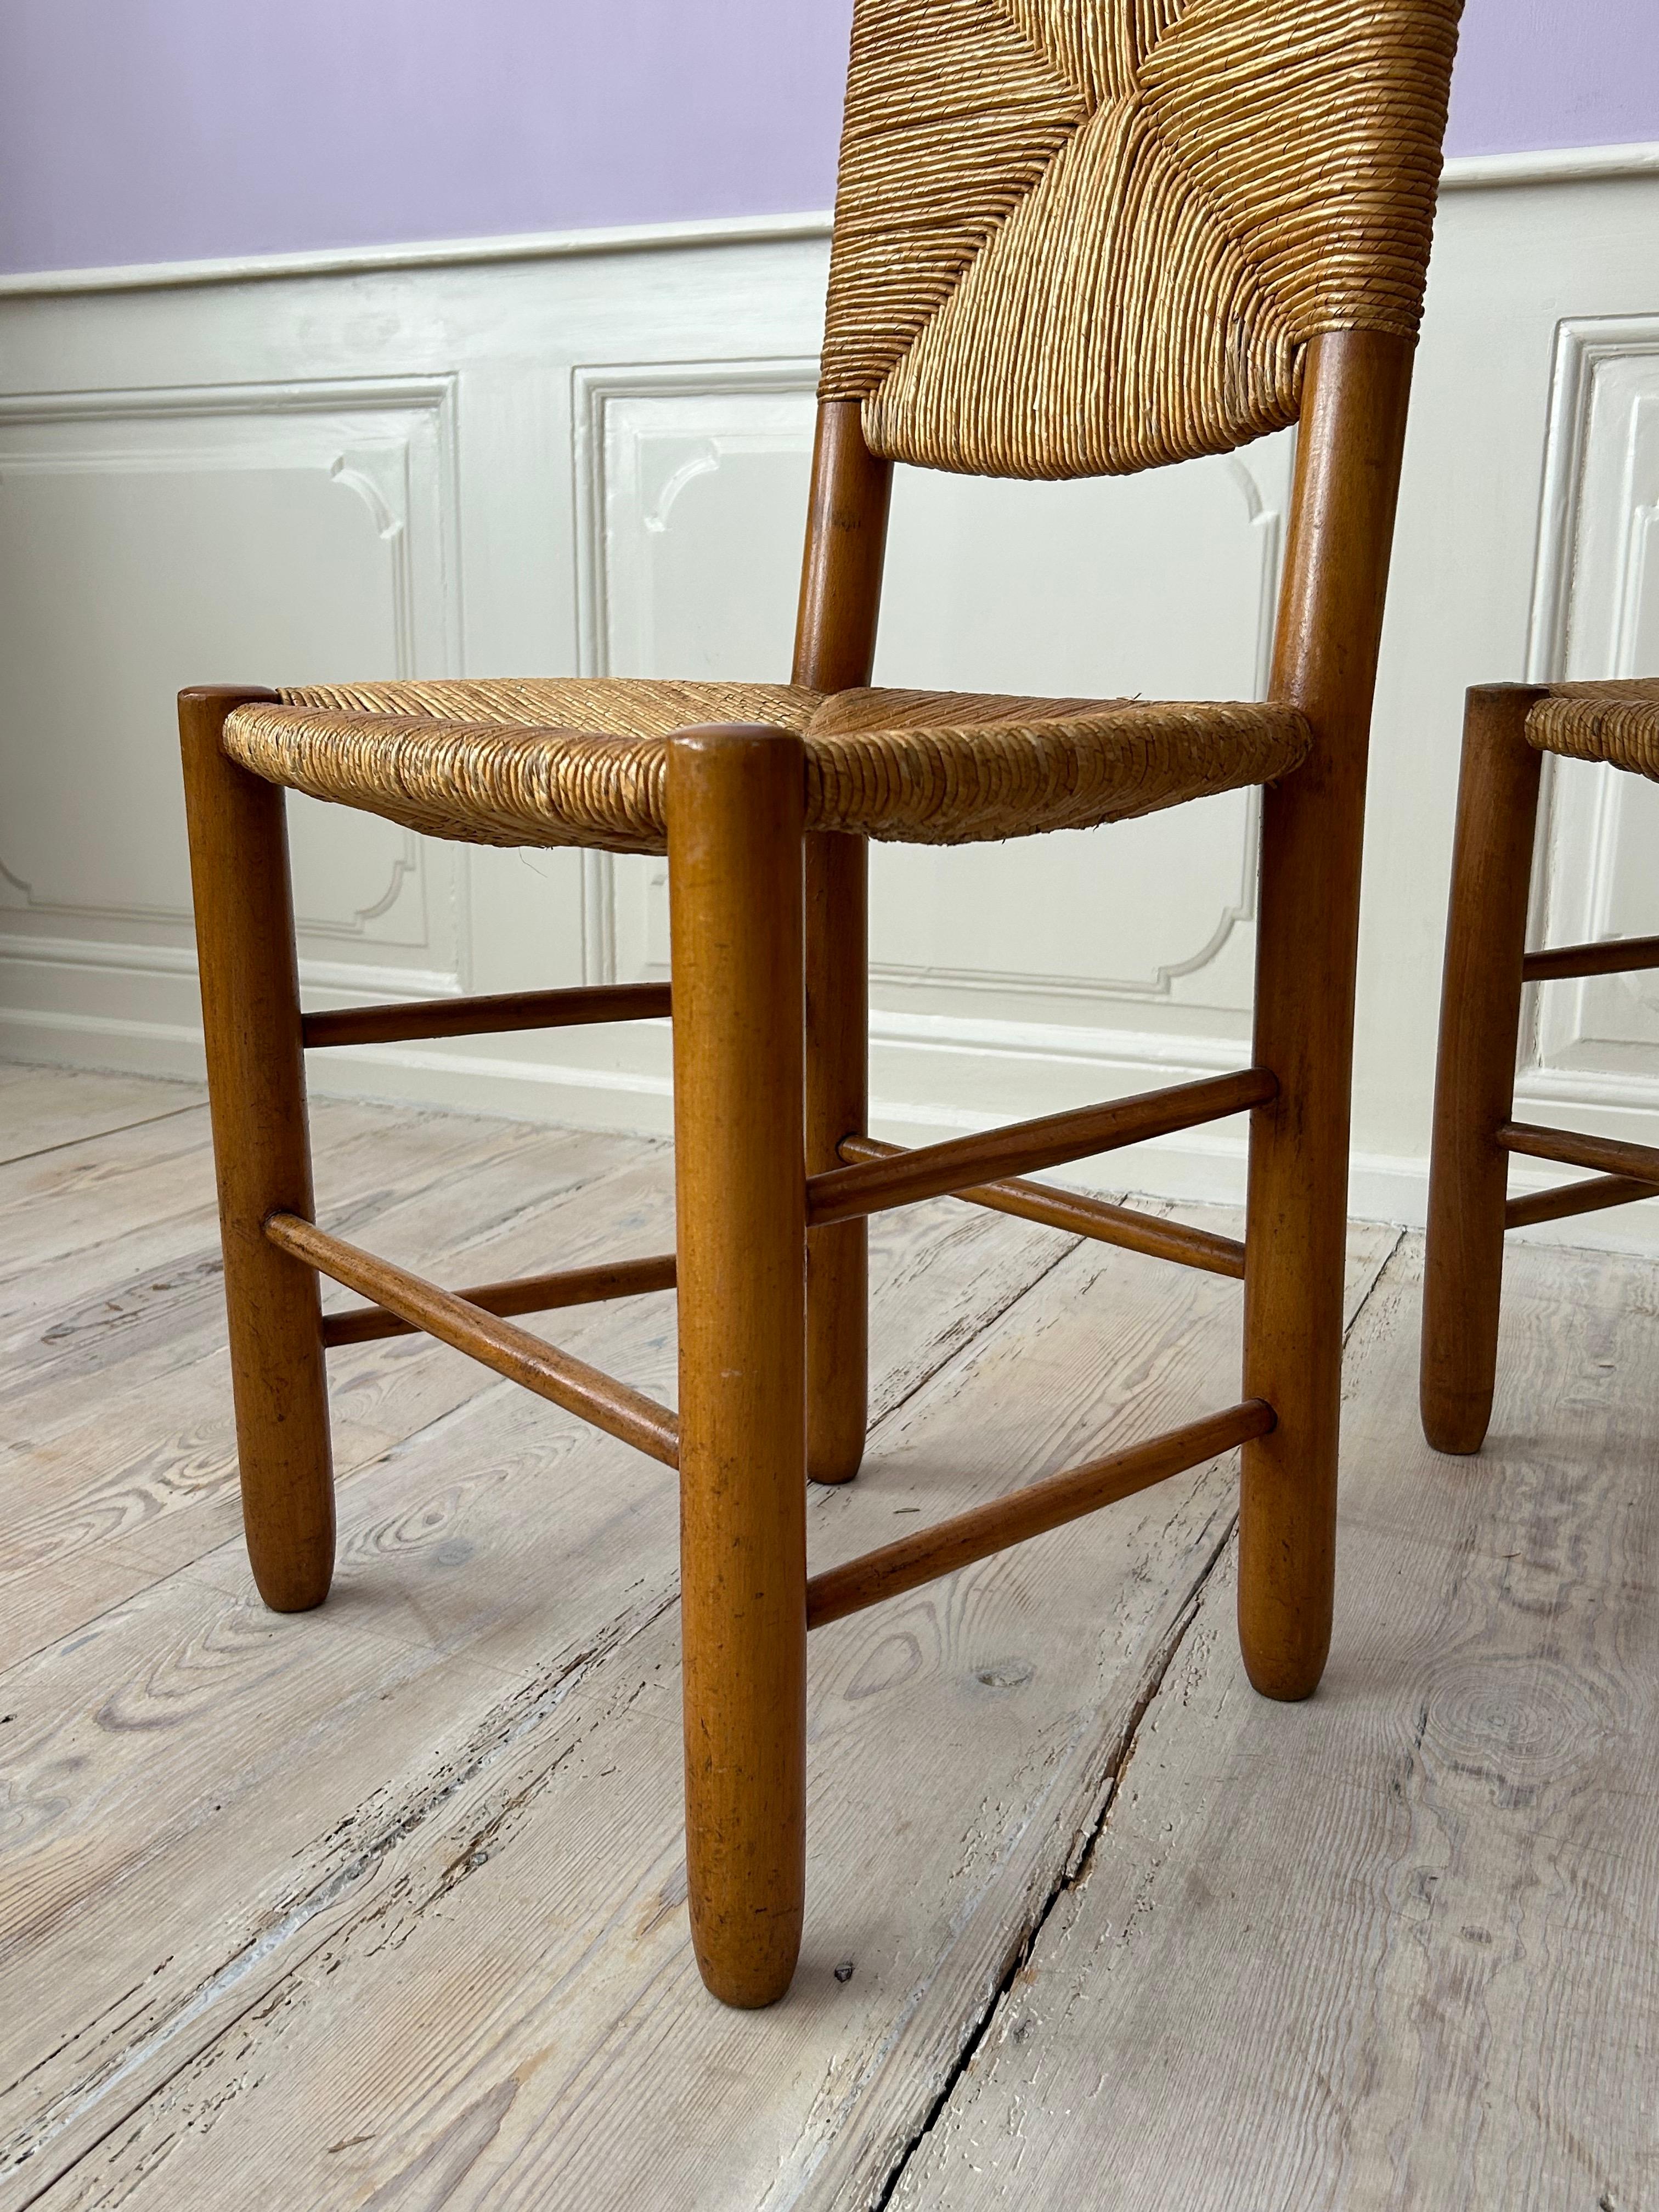 Vintage Set of Four Chairs in Ash and Straw, France, 1950s For Sale 7